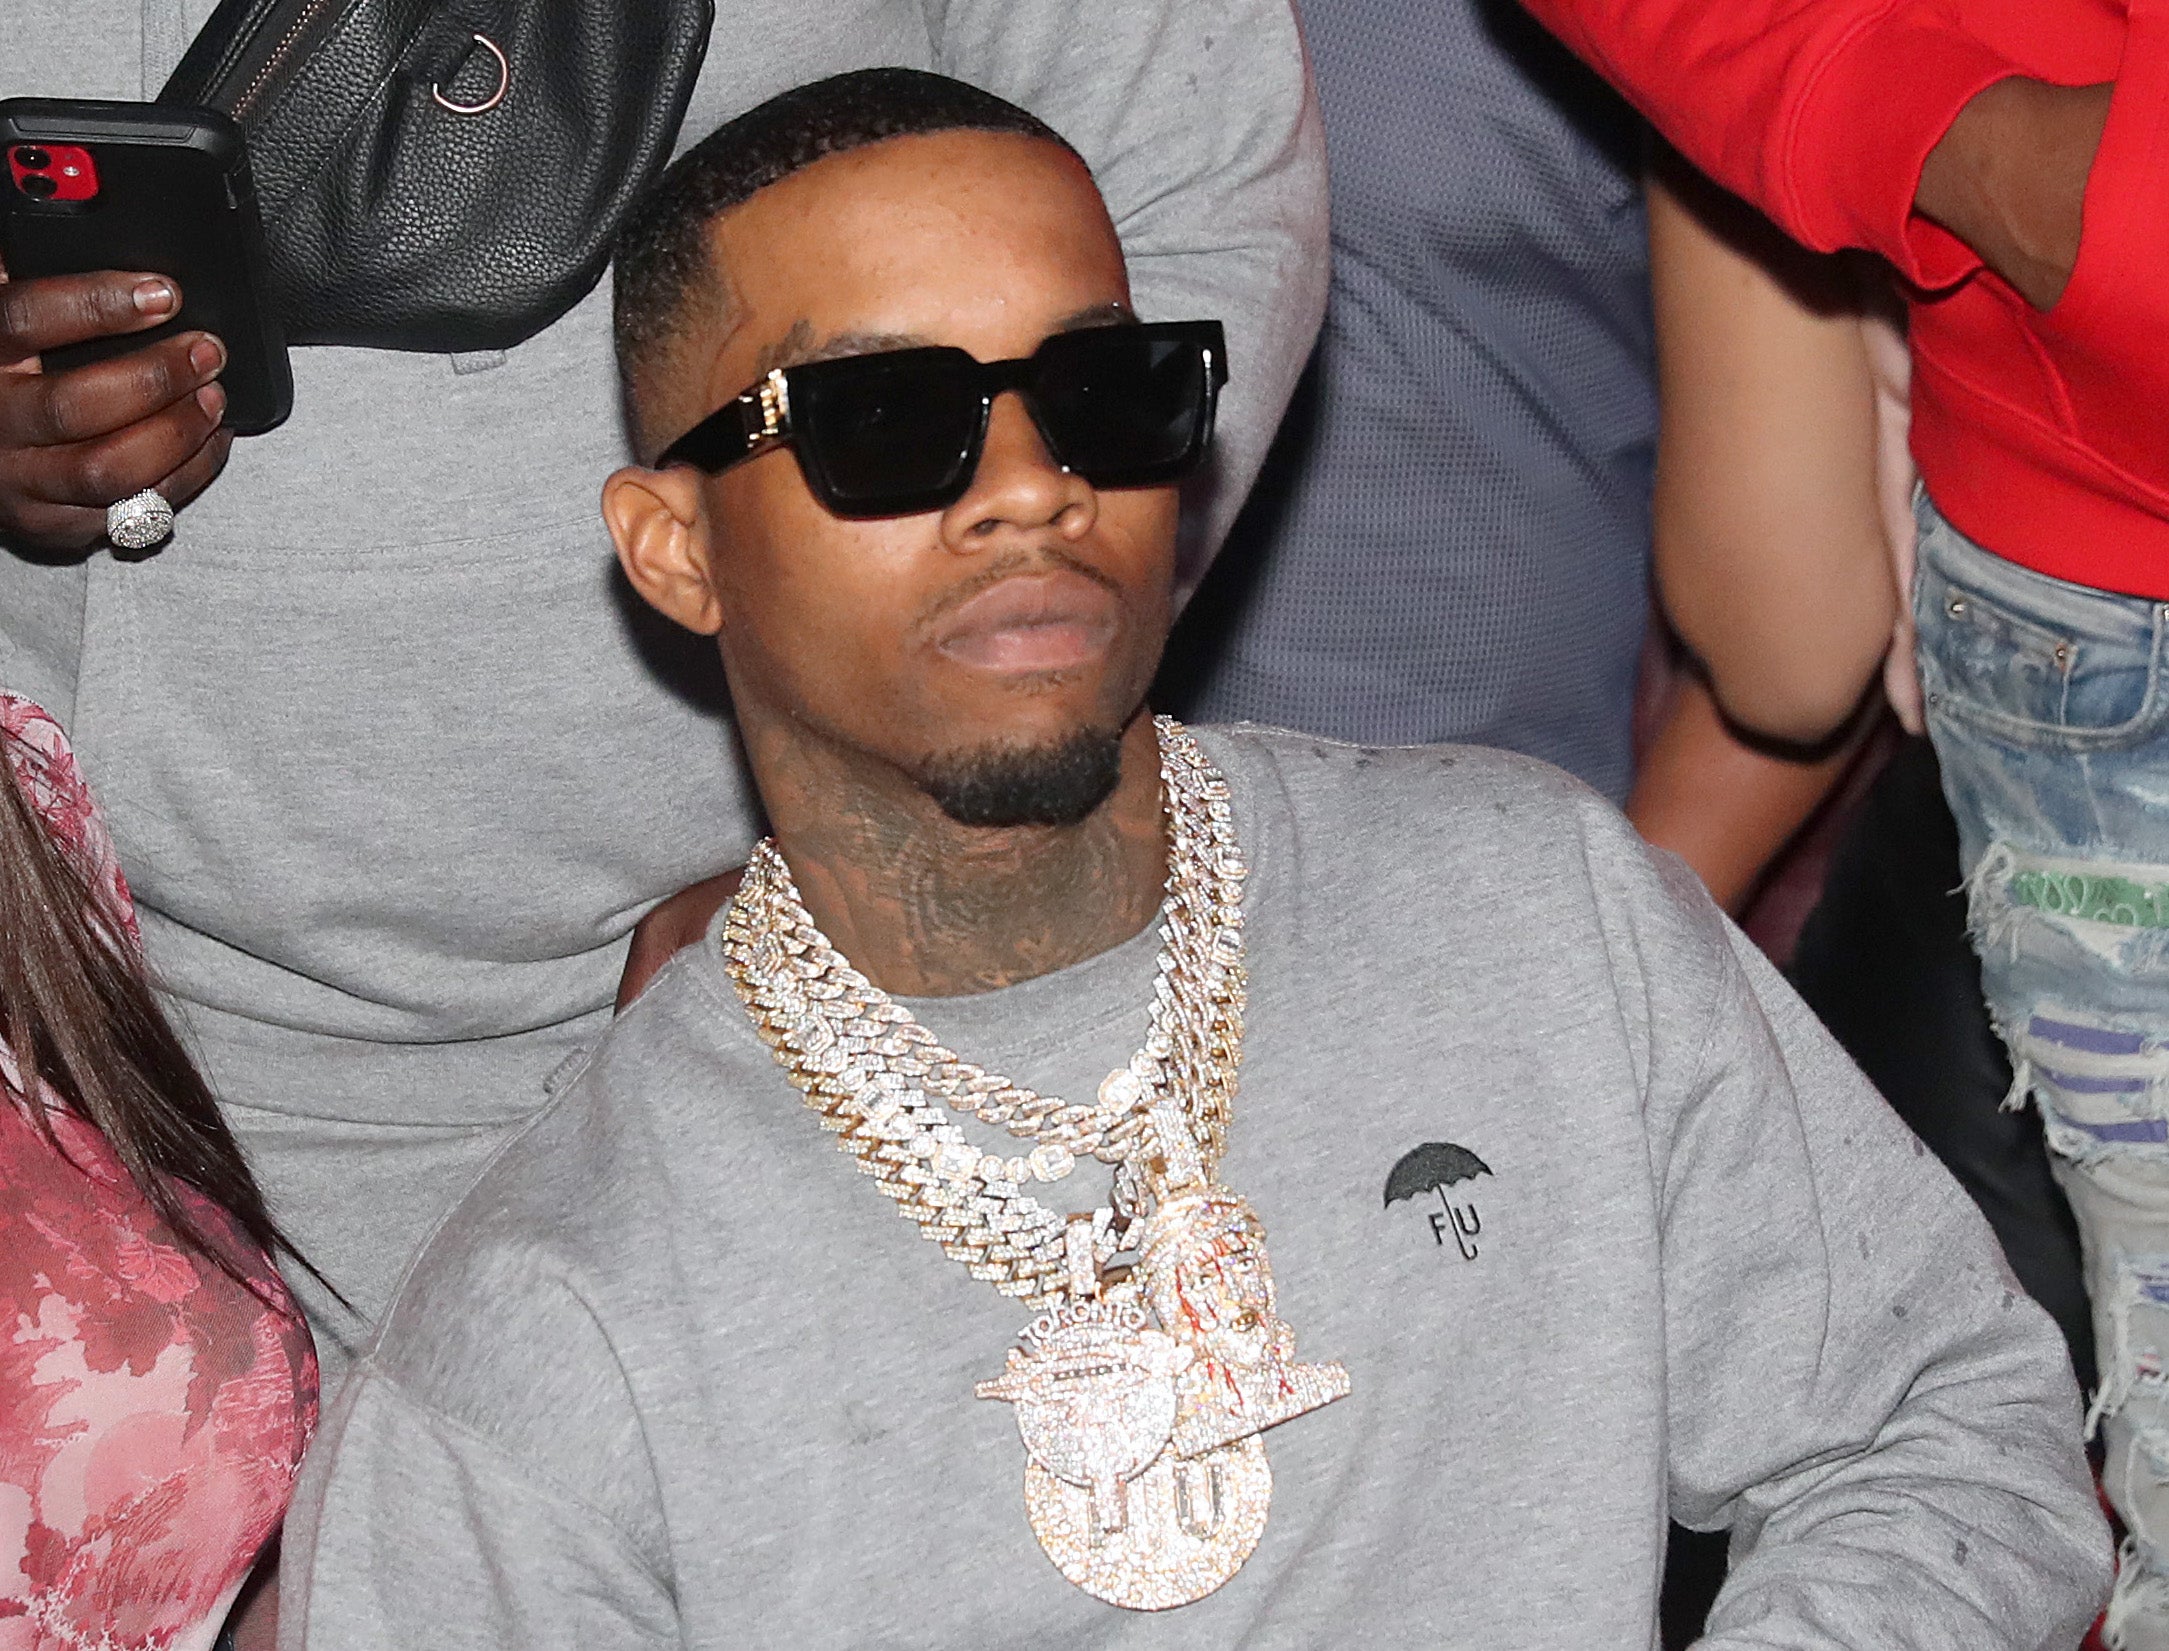 Prosecutors Request 13-Year Prison Sentence For Tory Lanez, Citing Ongoing Campaign To “Re-Traumatize” Megan Thee Stallion After Shooting